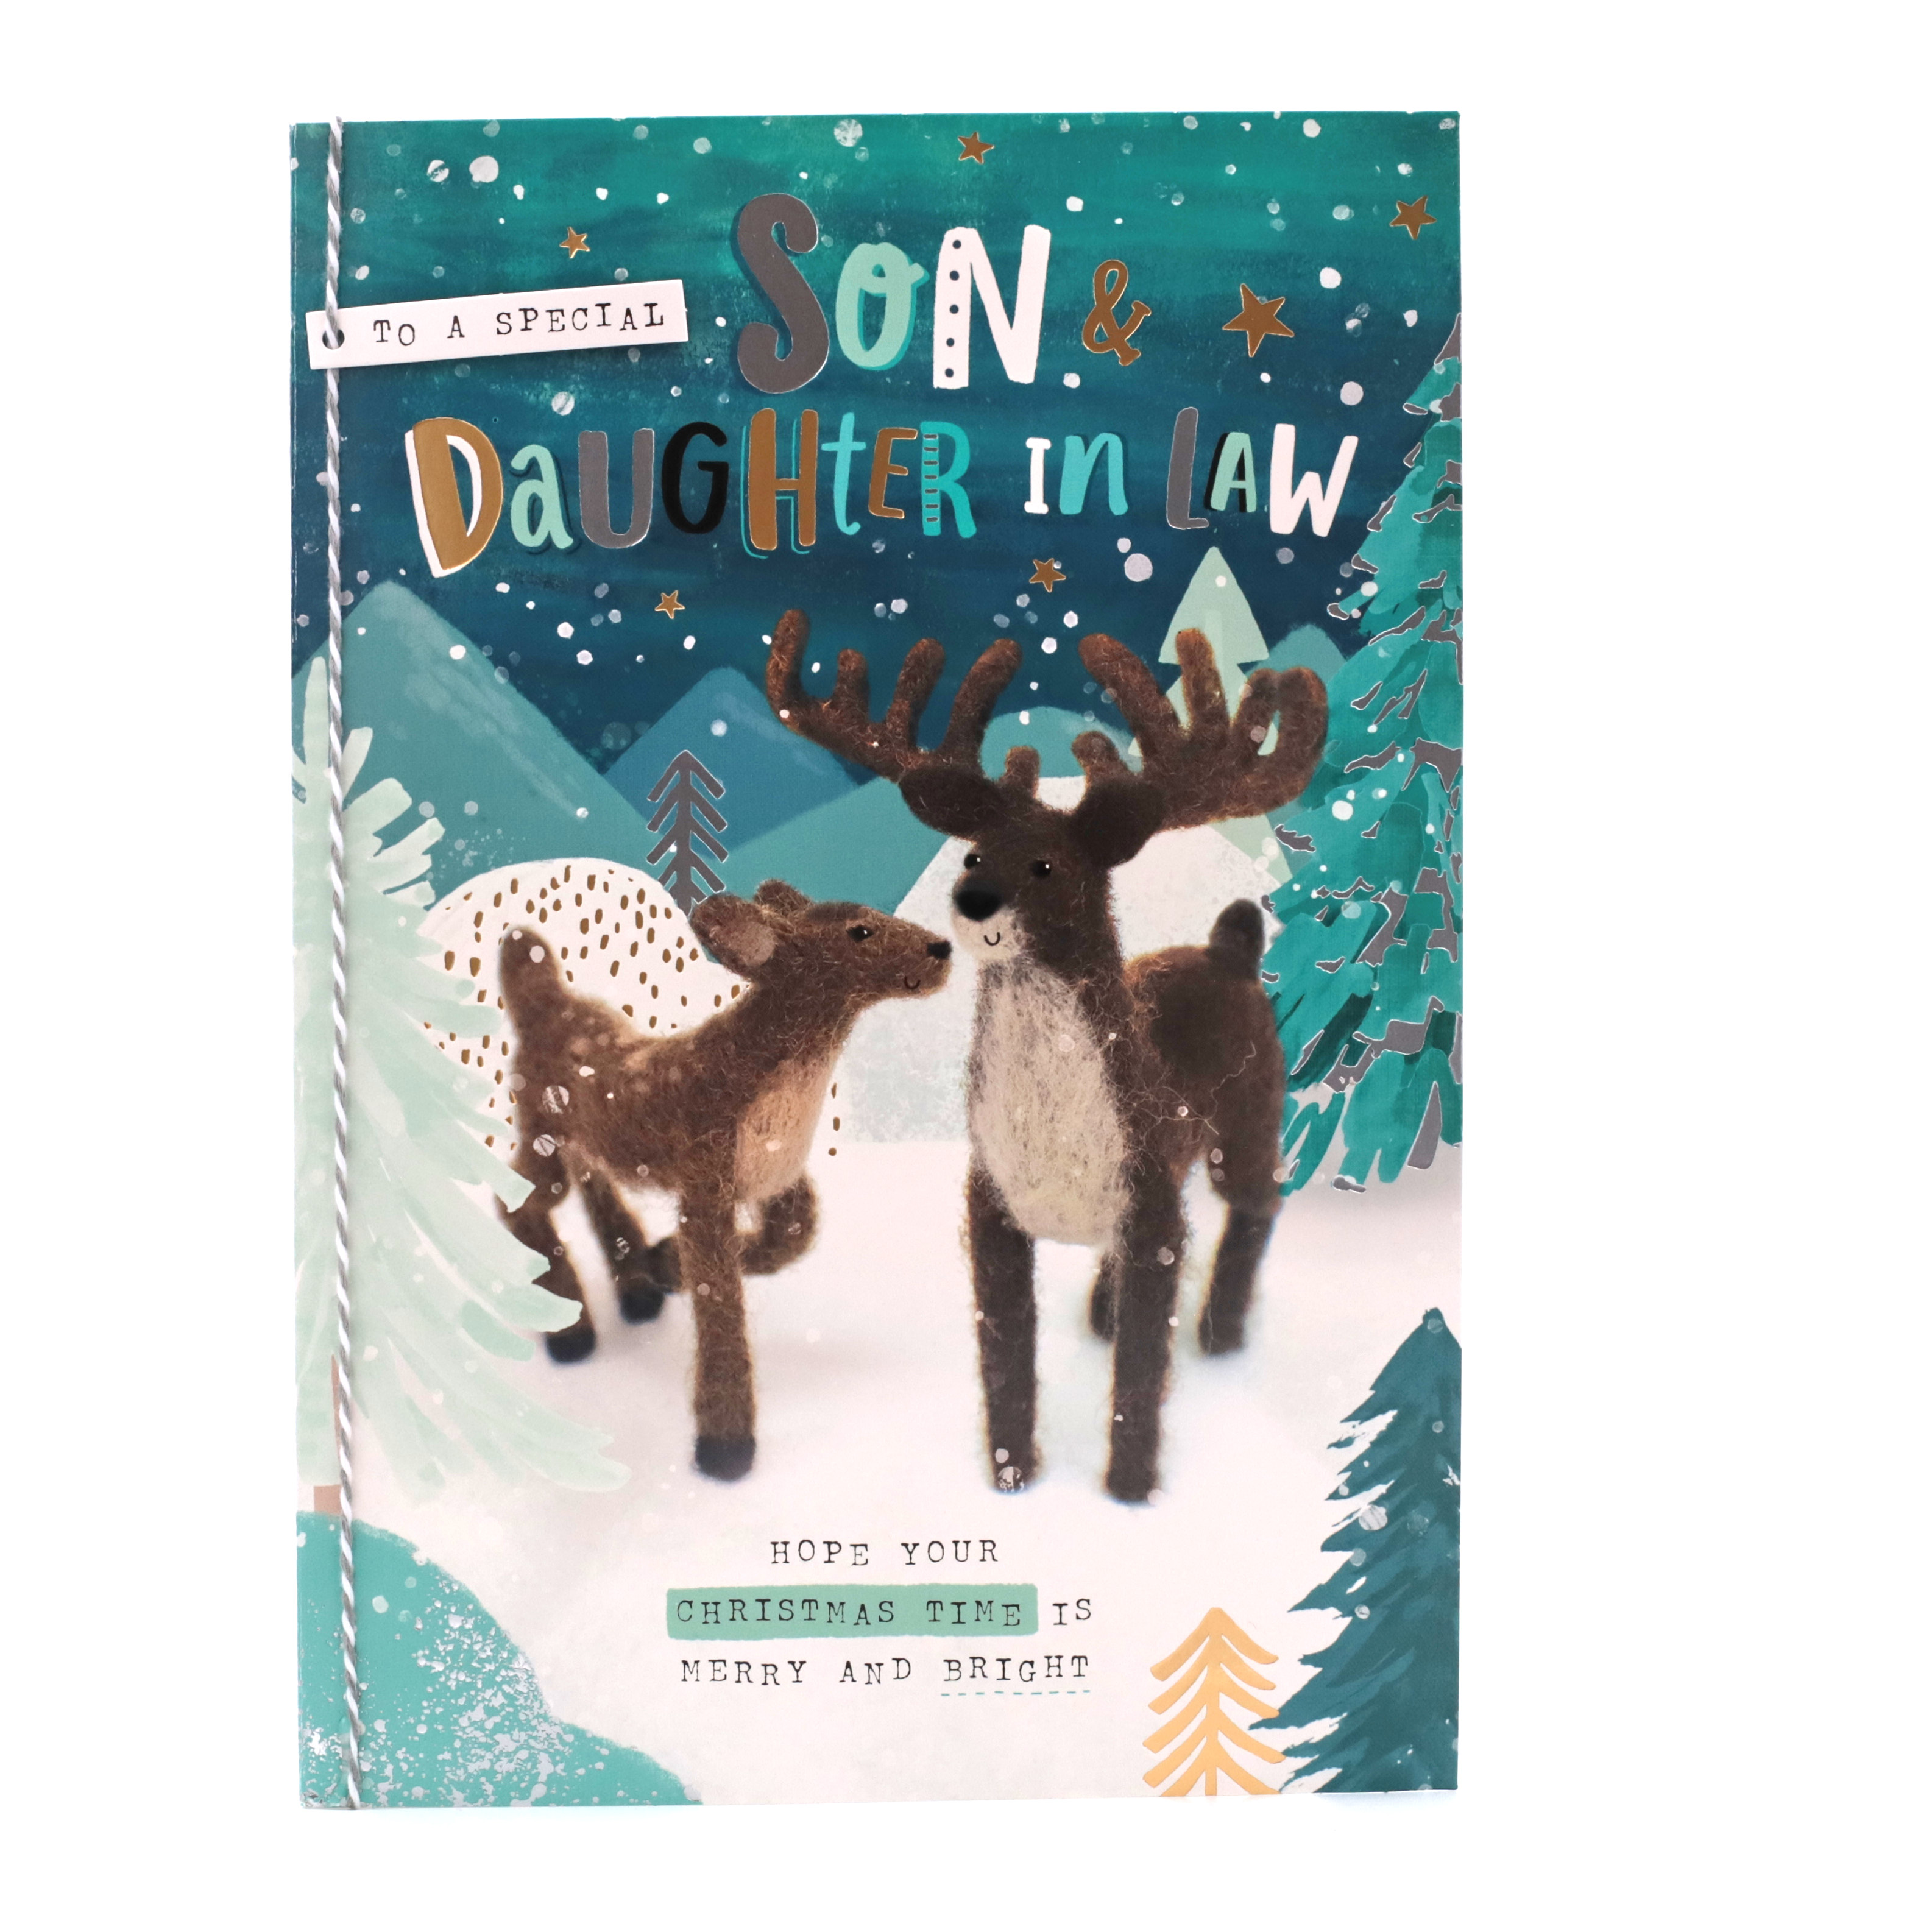 Christmas Card - Son And Daughter In Law, Cute Snow Reindeer